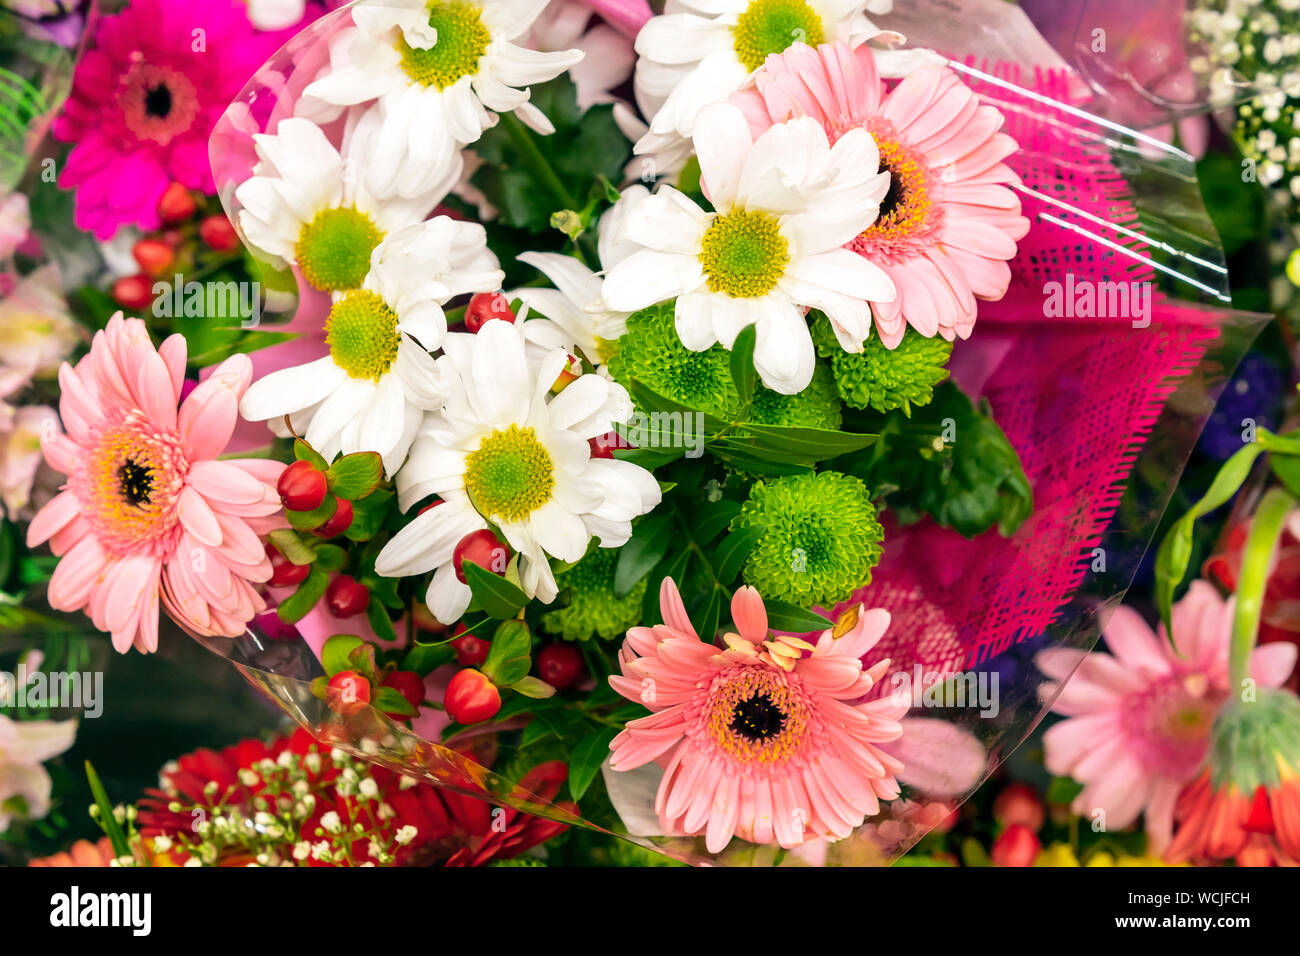 Flower composition from different types of flowers Stock Photo - Alamy